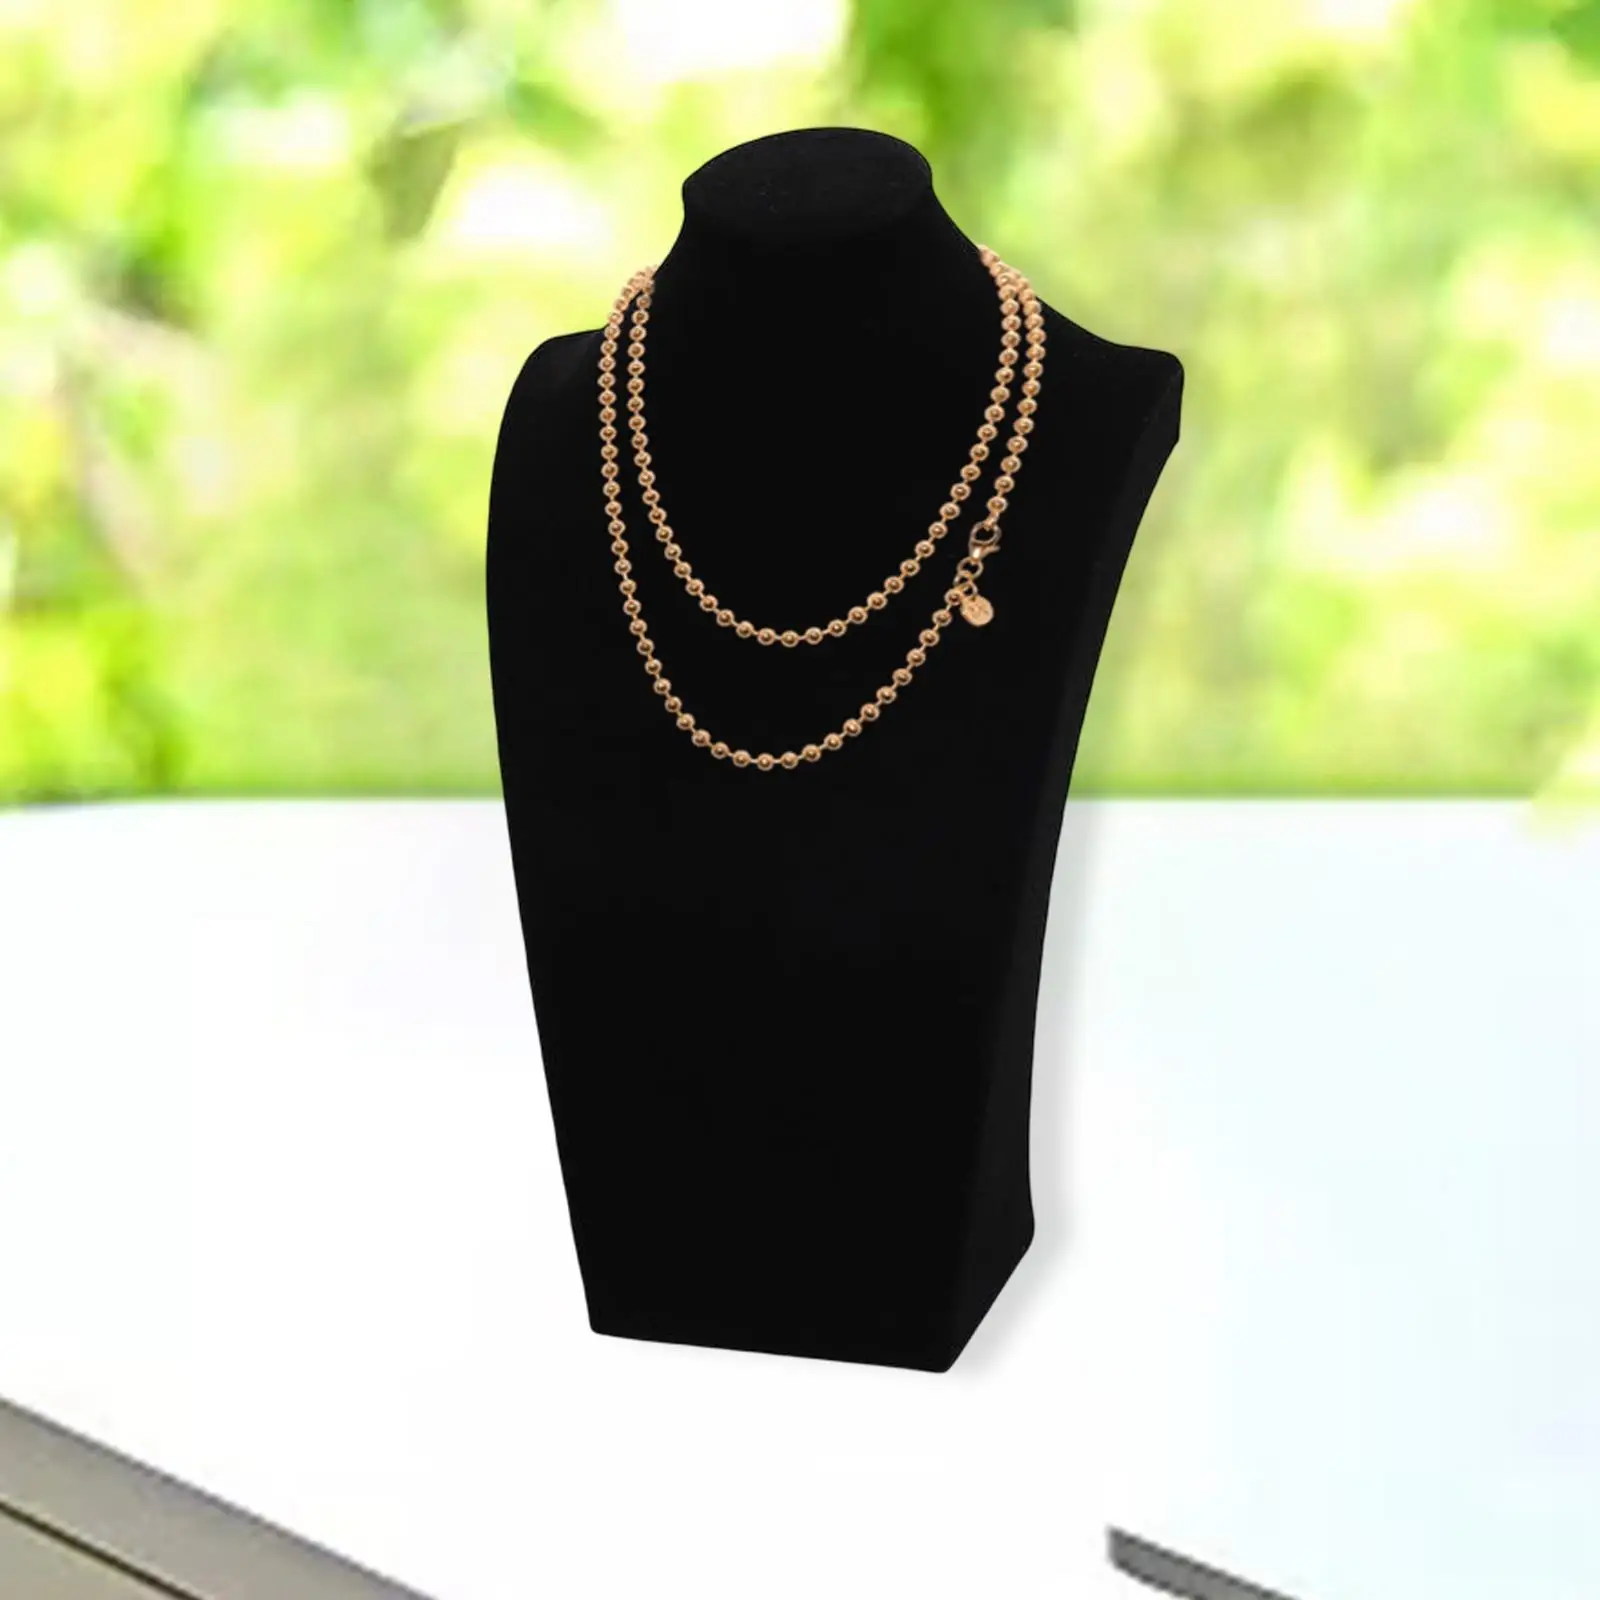 Necklace Display Mannequin Chain Beads Showing for Fair Decoration Storage